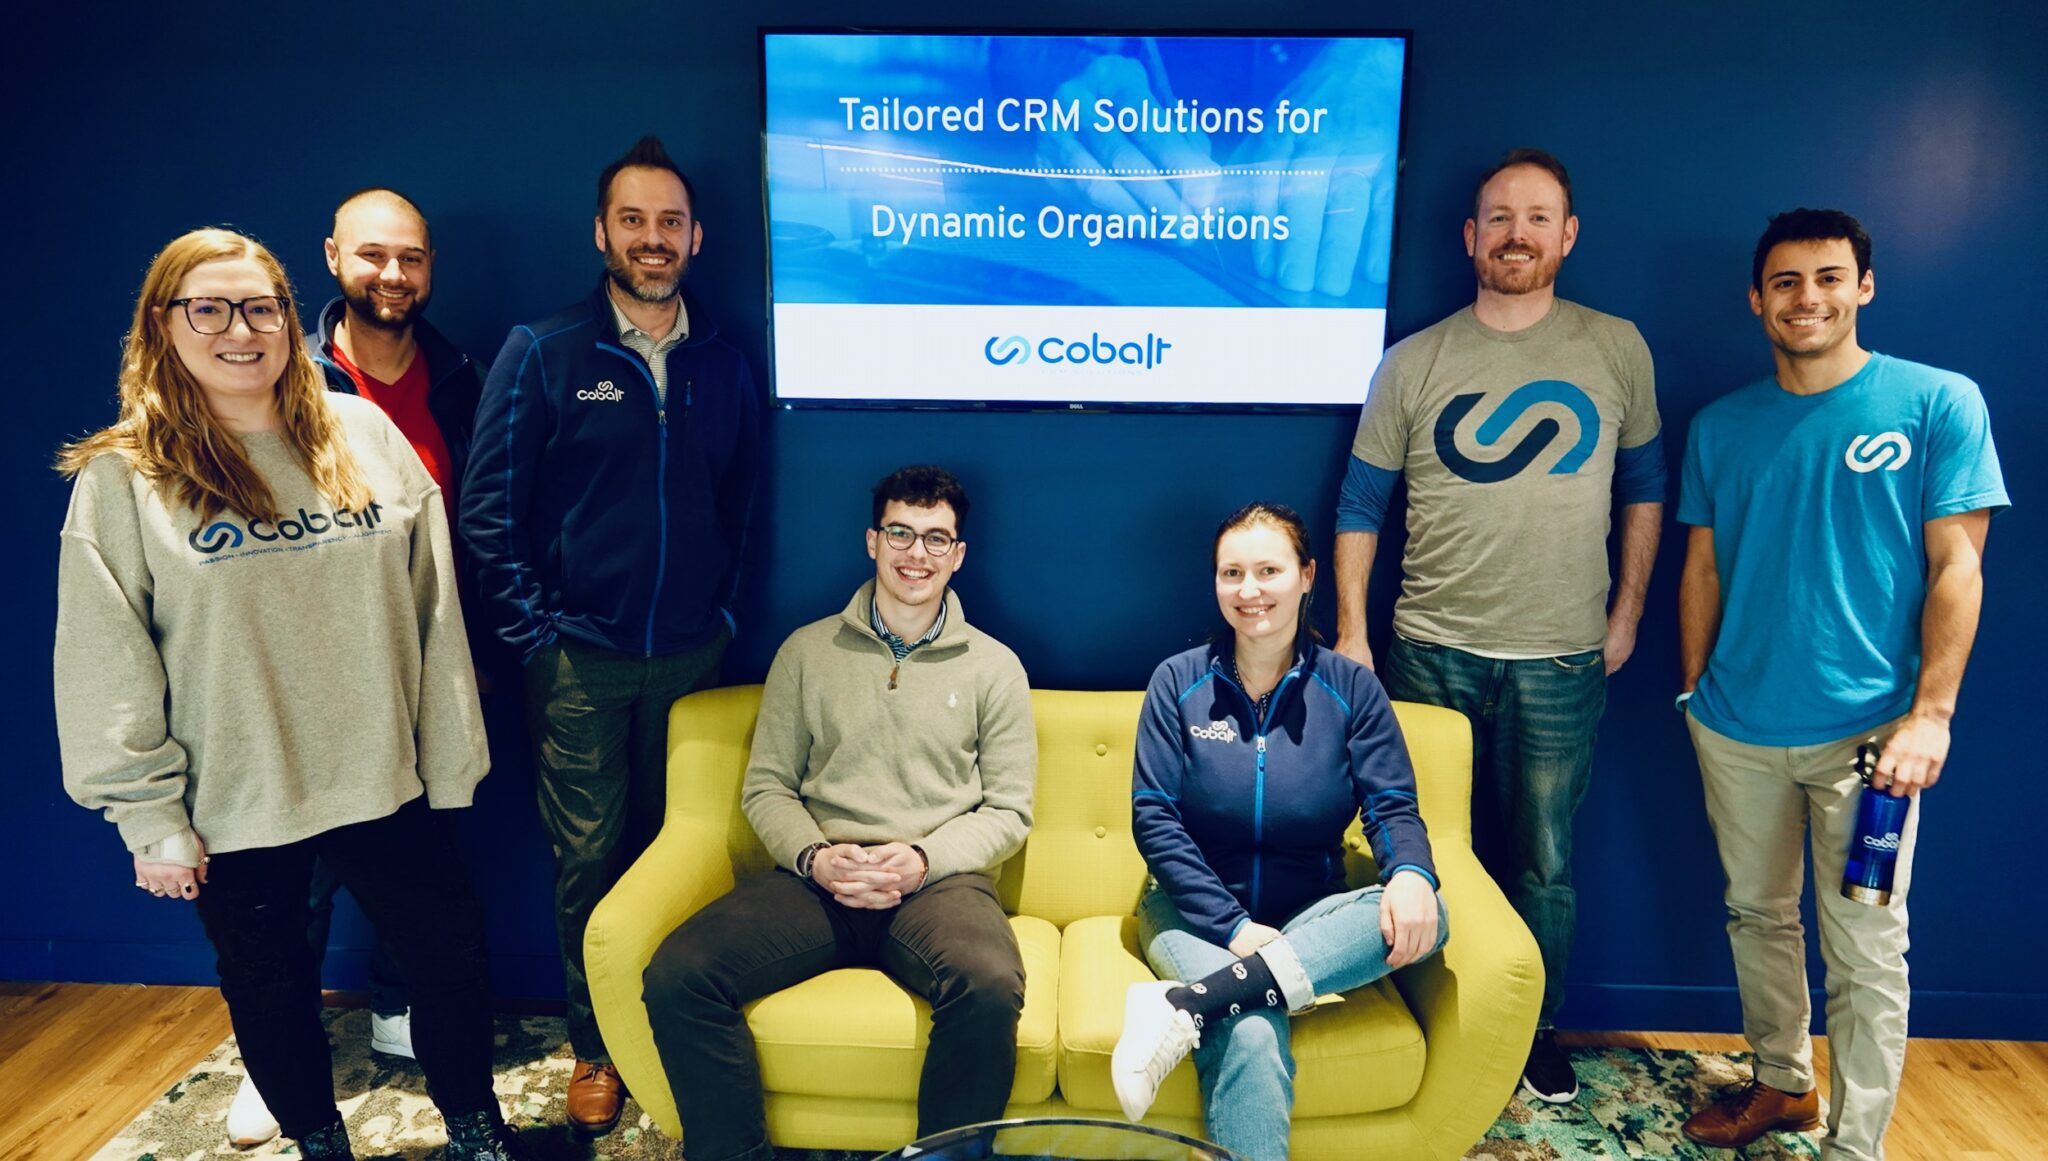 Some of Cobalt's certification management software experts in a group photo of the Cobalt lobby.